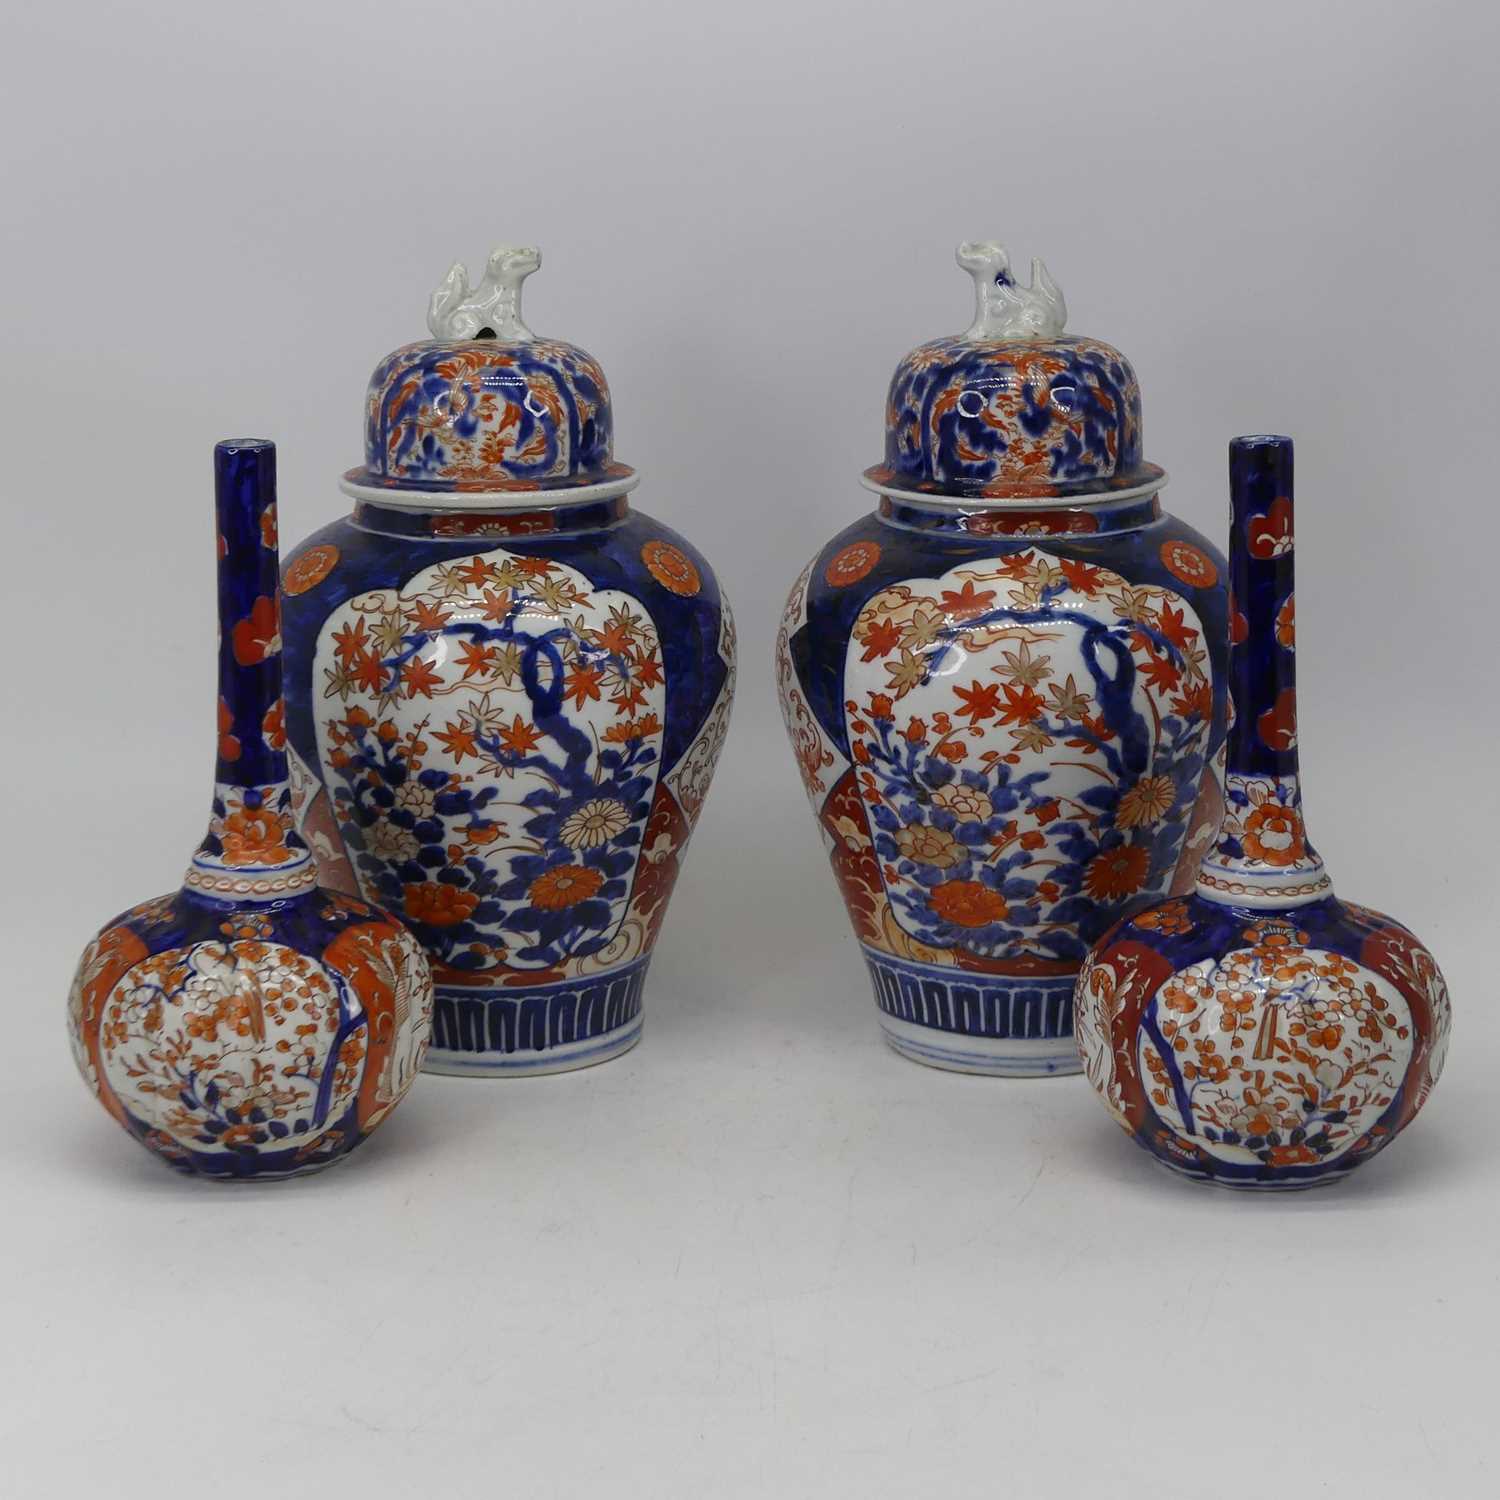 A pair of Japanese Imari bottle vases, each having a slender tapering neck to a compressed melon